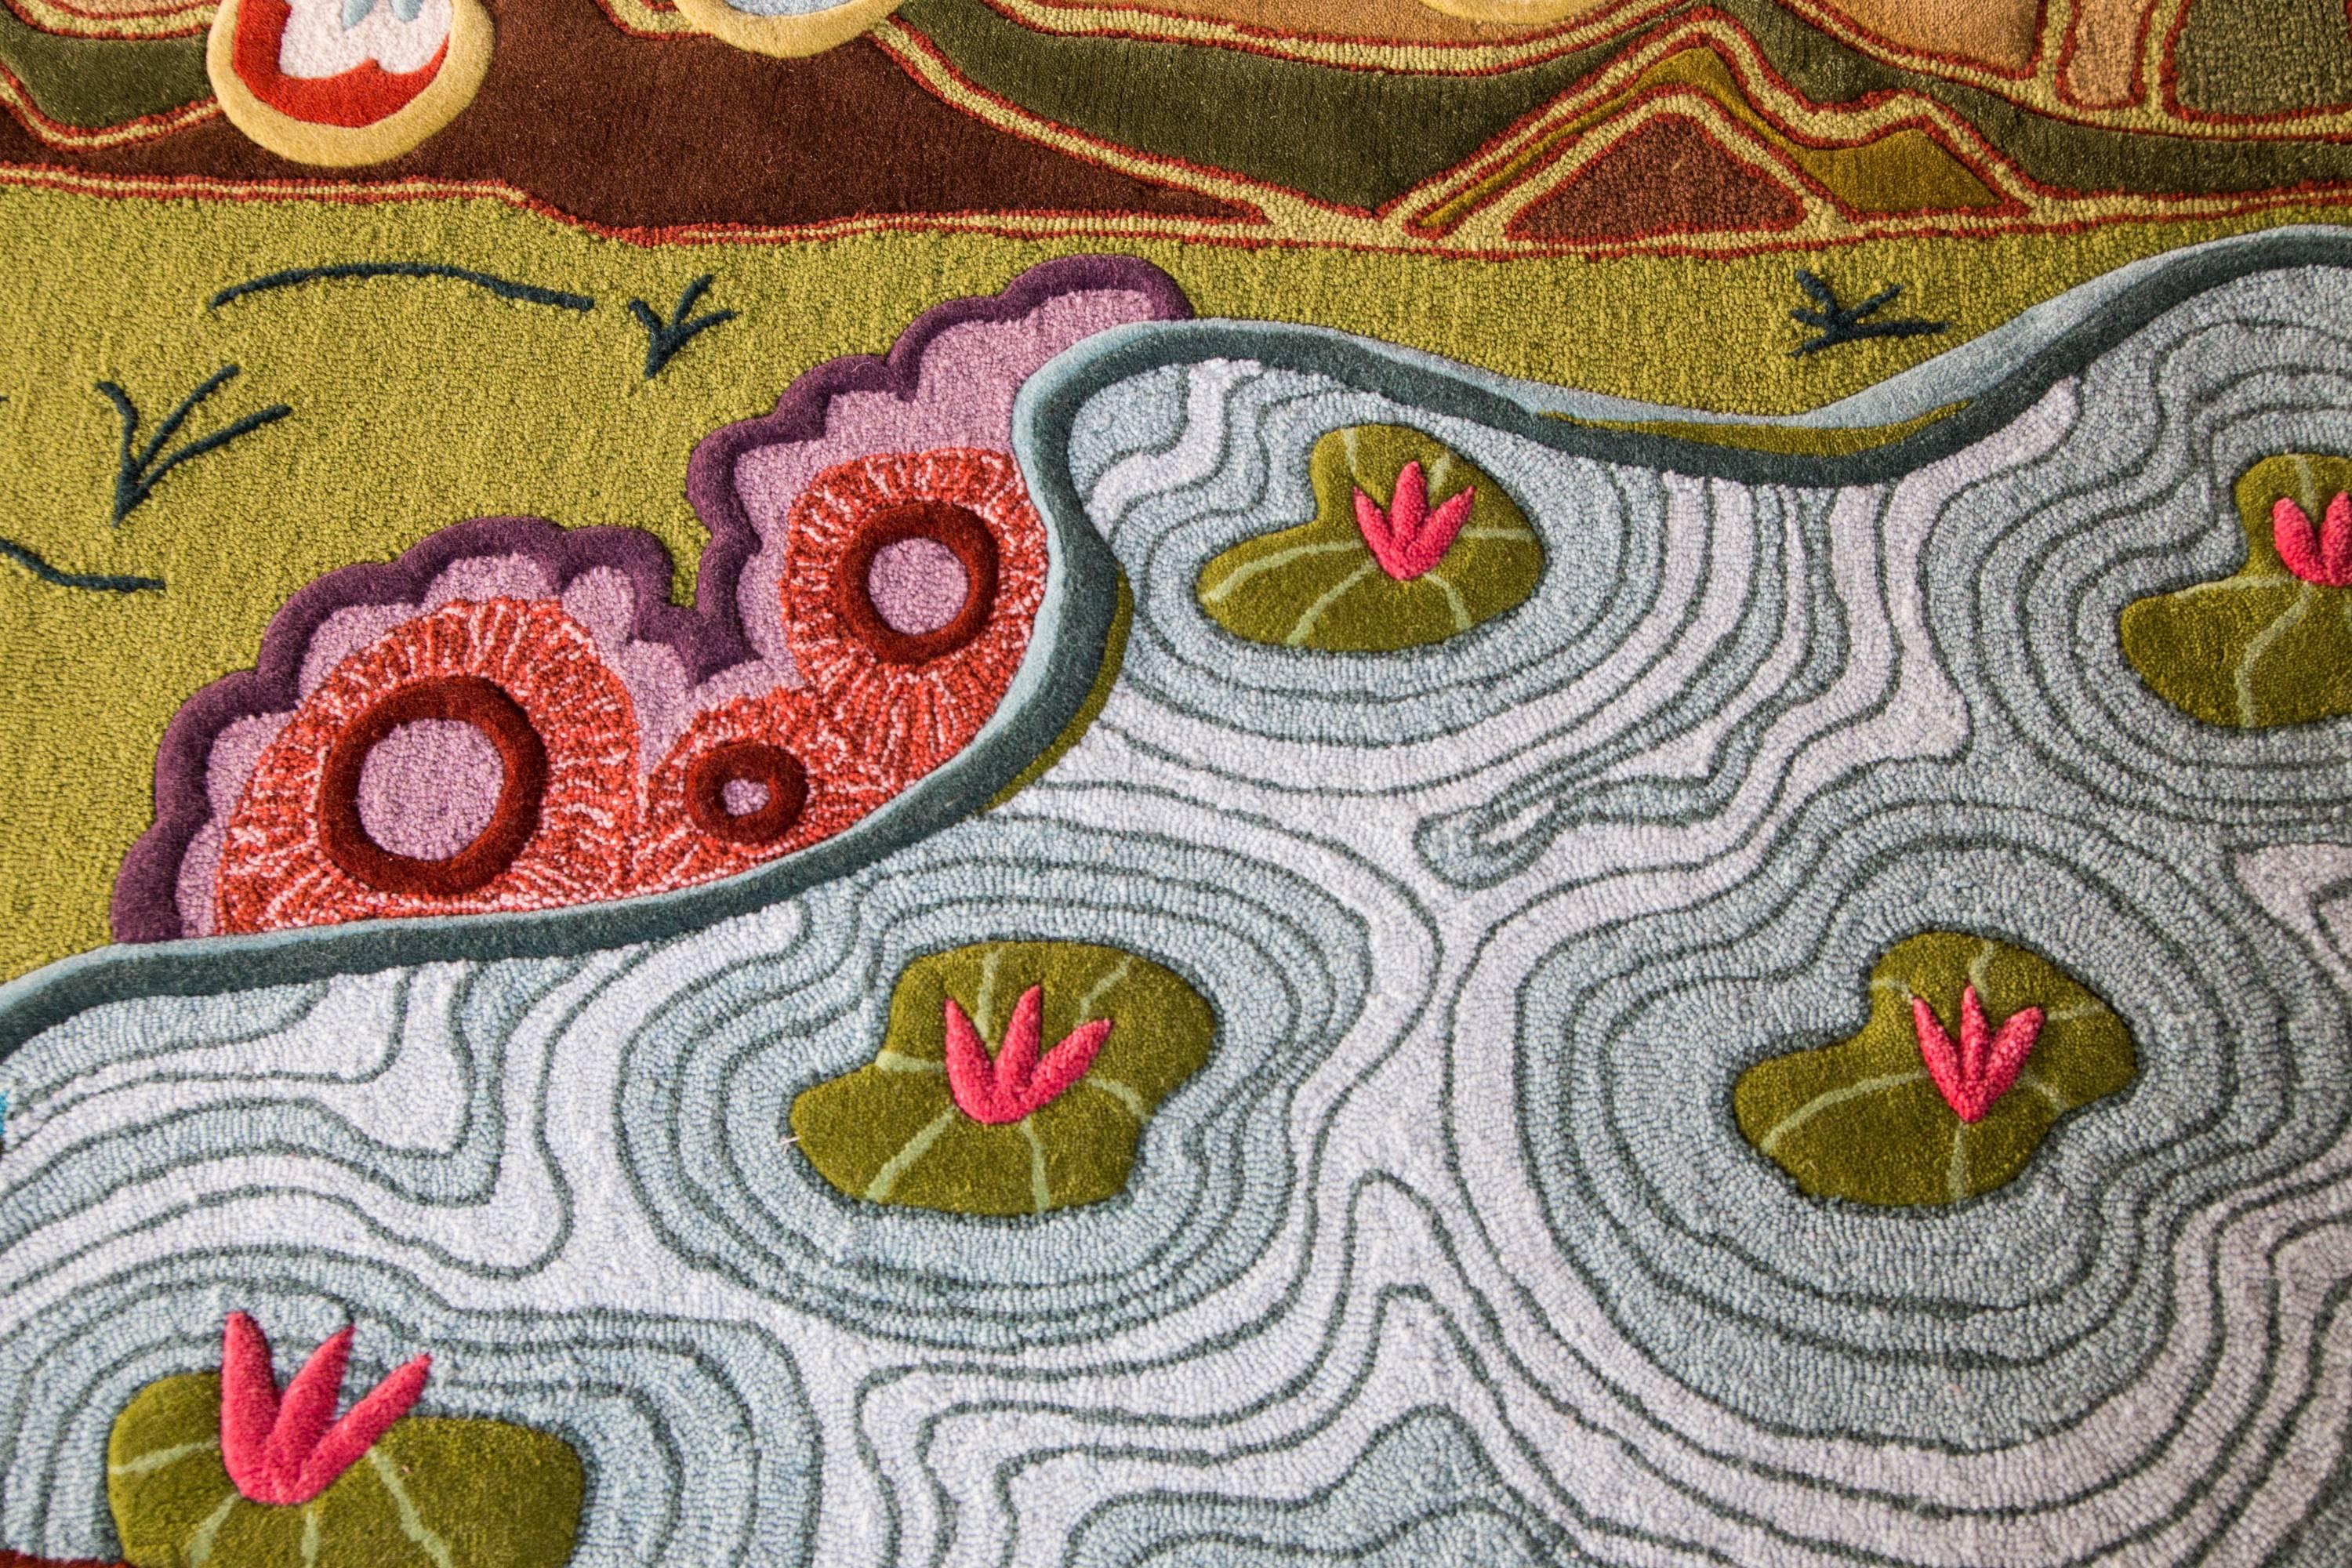 Modern Angela Adams Easton's Pond Area Rug & Tapestry, One-of-a-kind, Handcrafted Wool For Sale